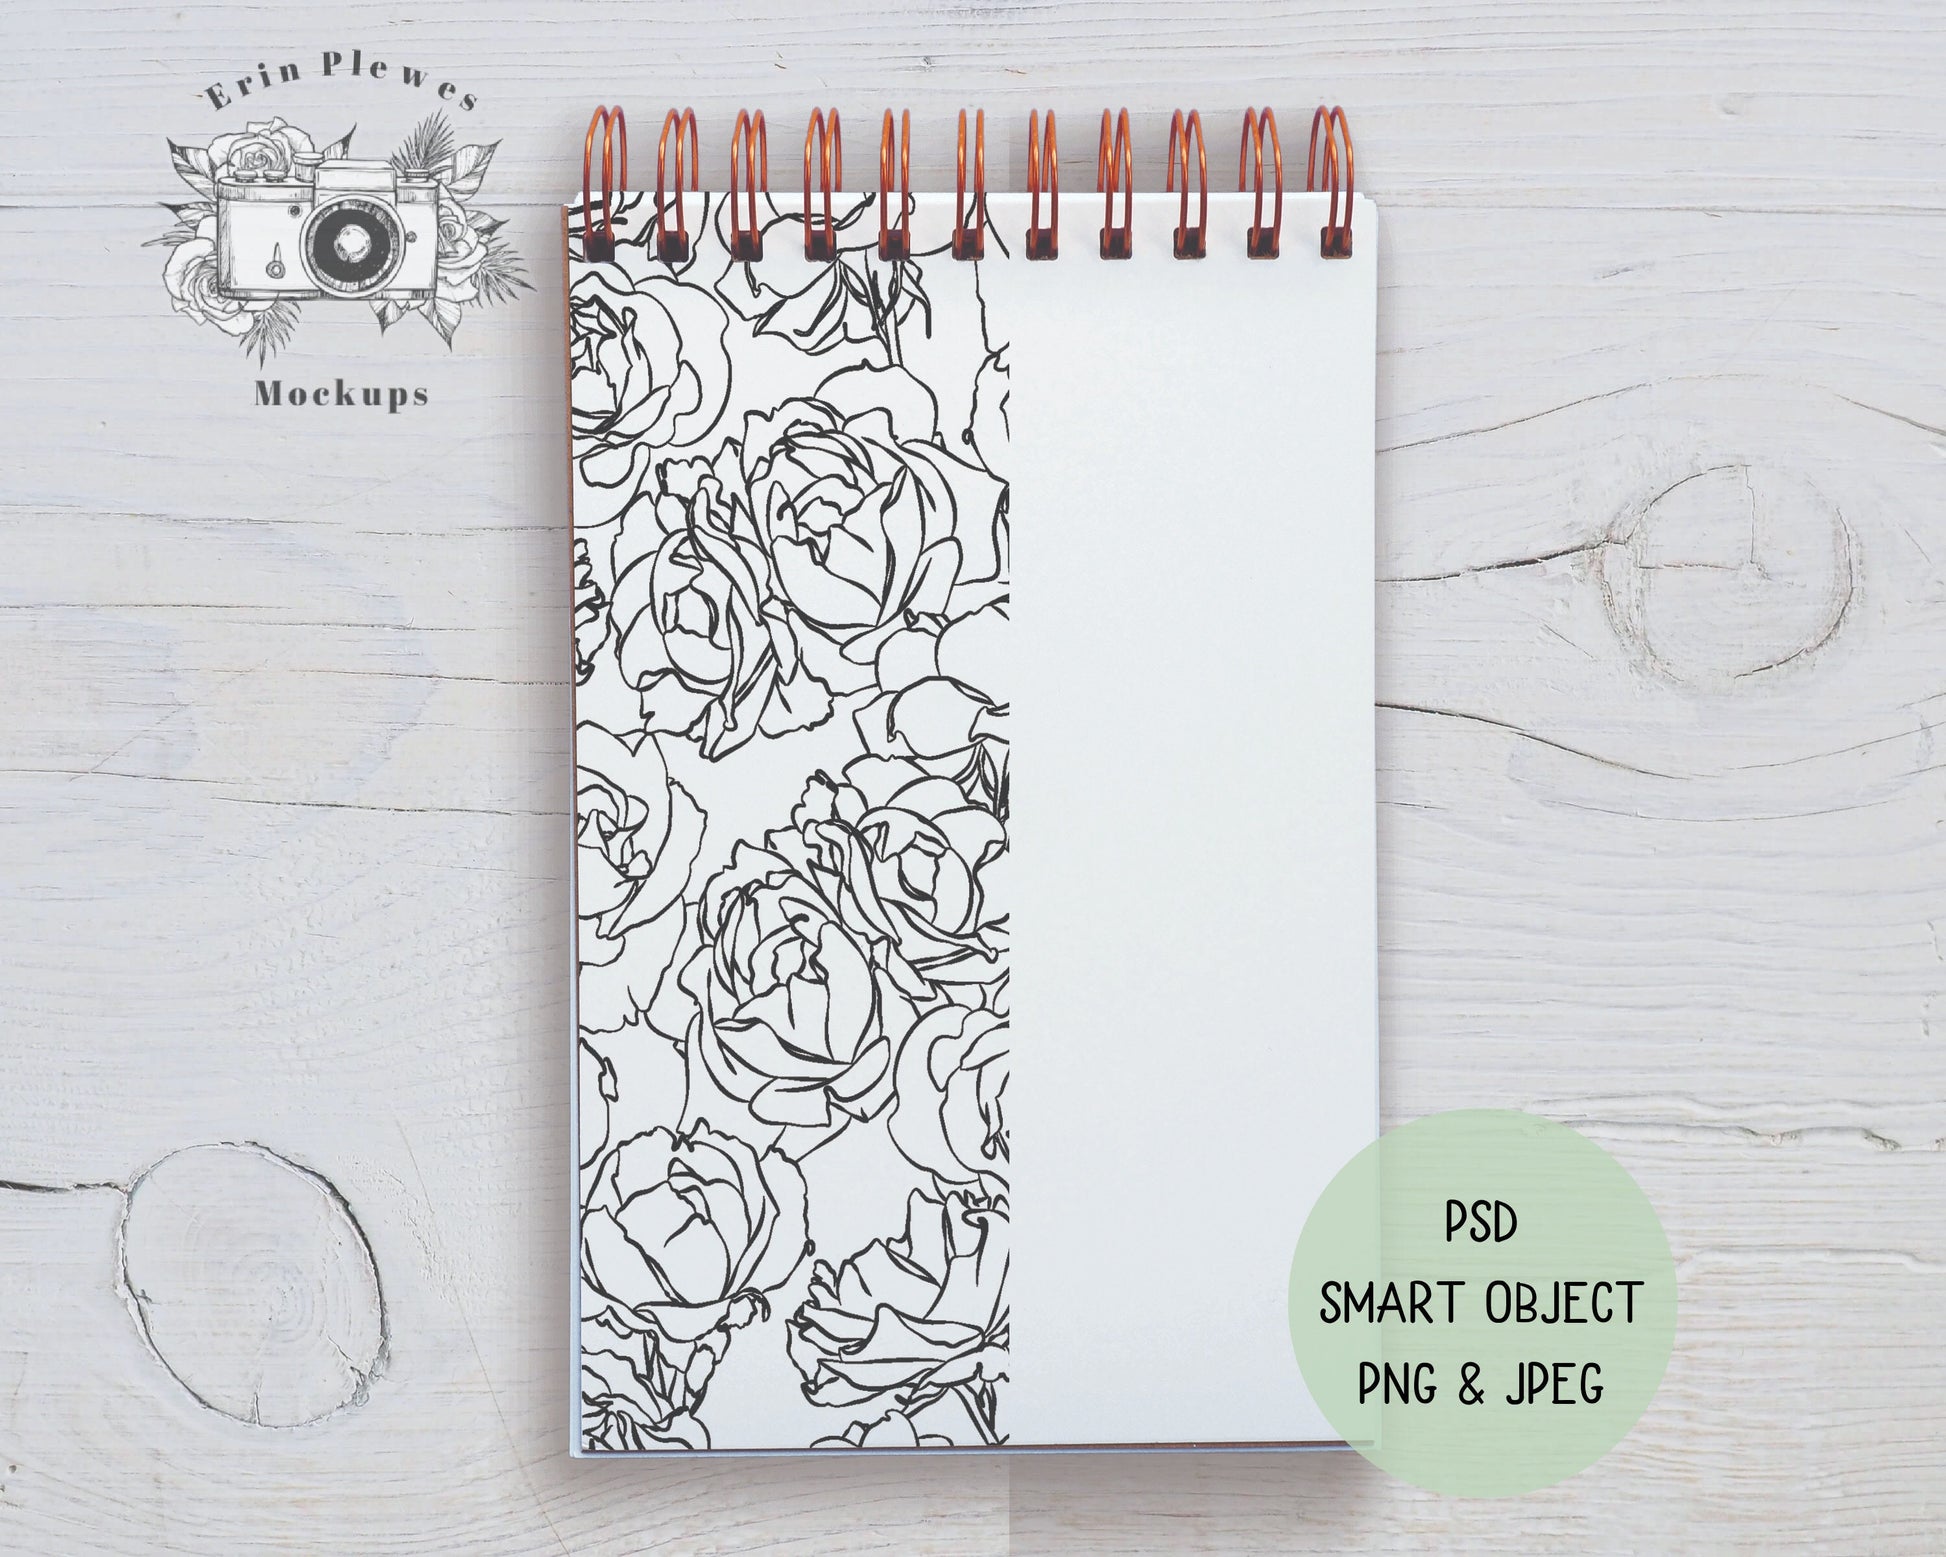 Spiral Top Diary Mockup, Notebook Mockup PSD Smart Object, Journal Flat Lay, Instant Digital Download Jpeg PNG Template